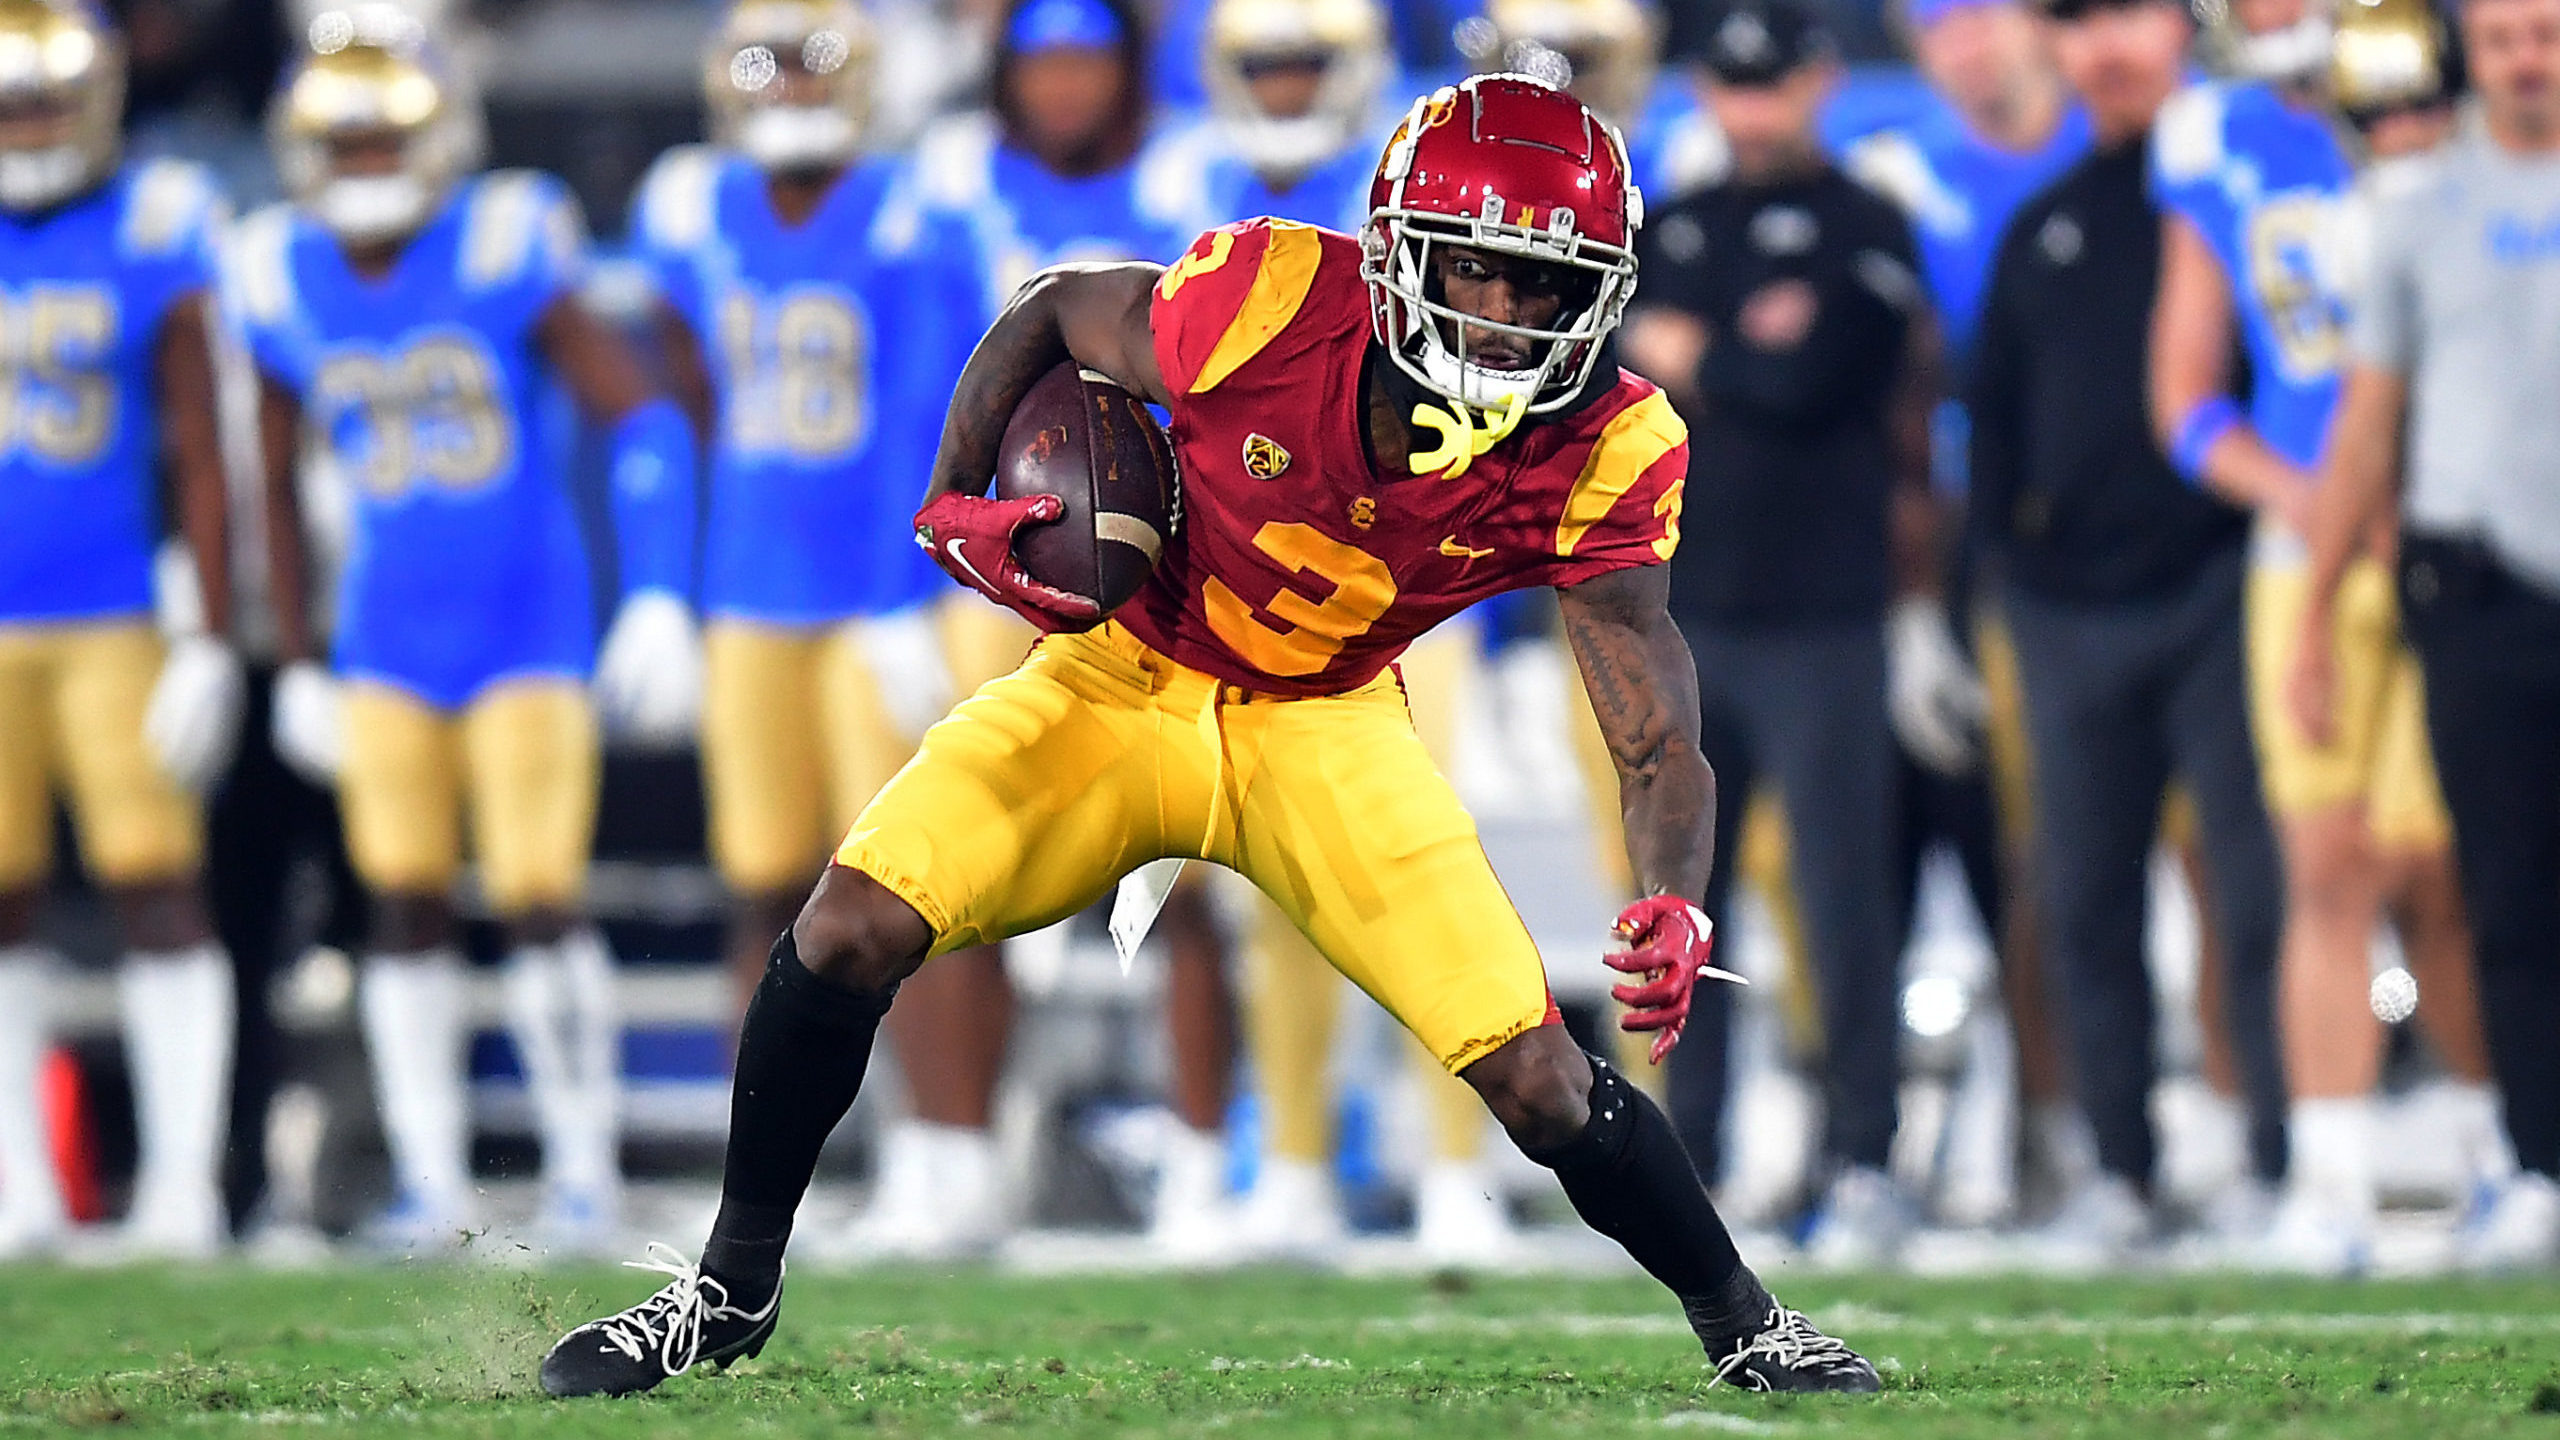 The 11th pick in this mock draft, USC WR Jordan Addison